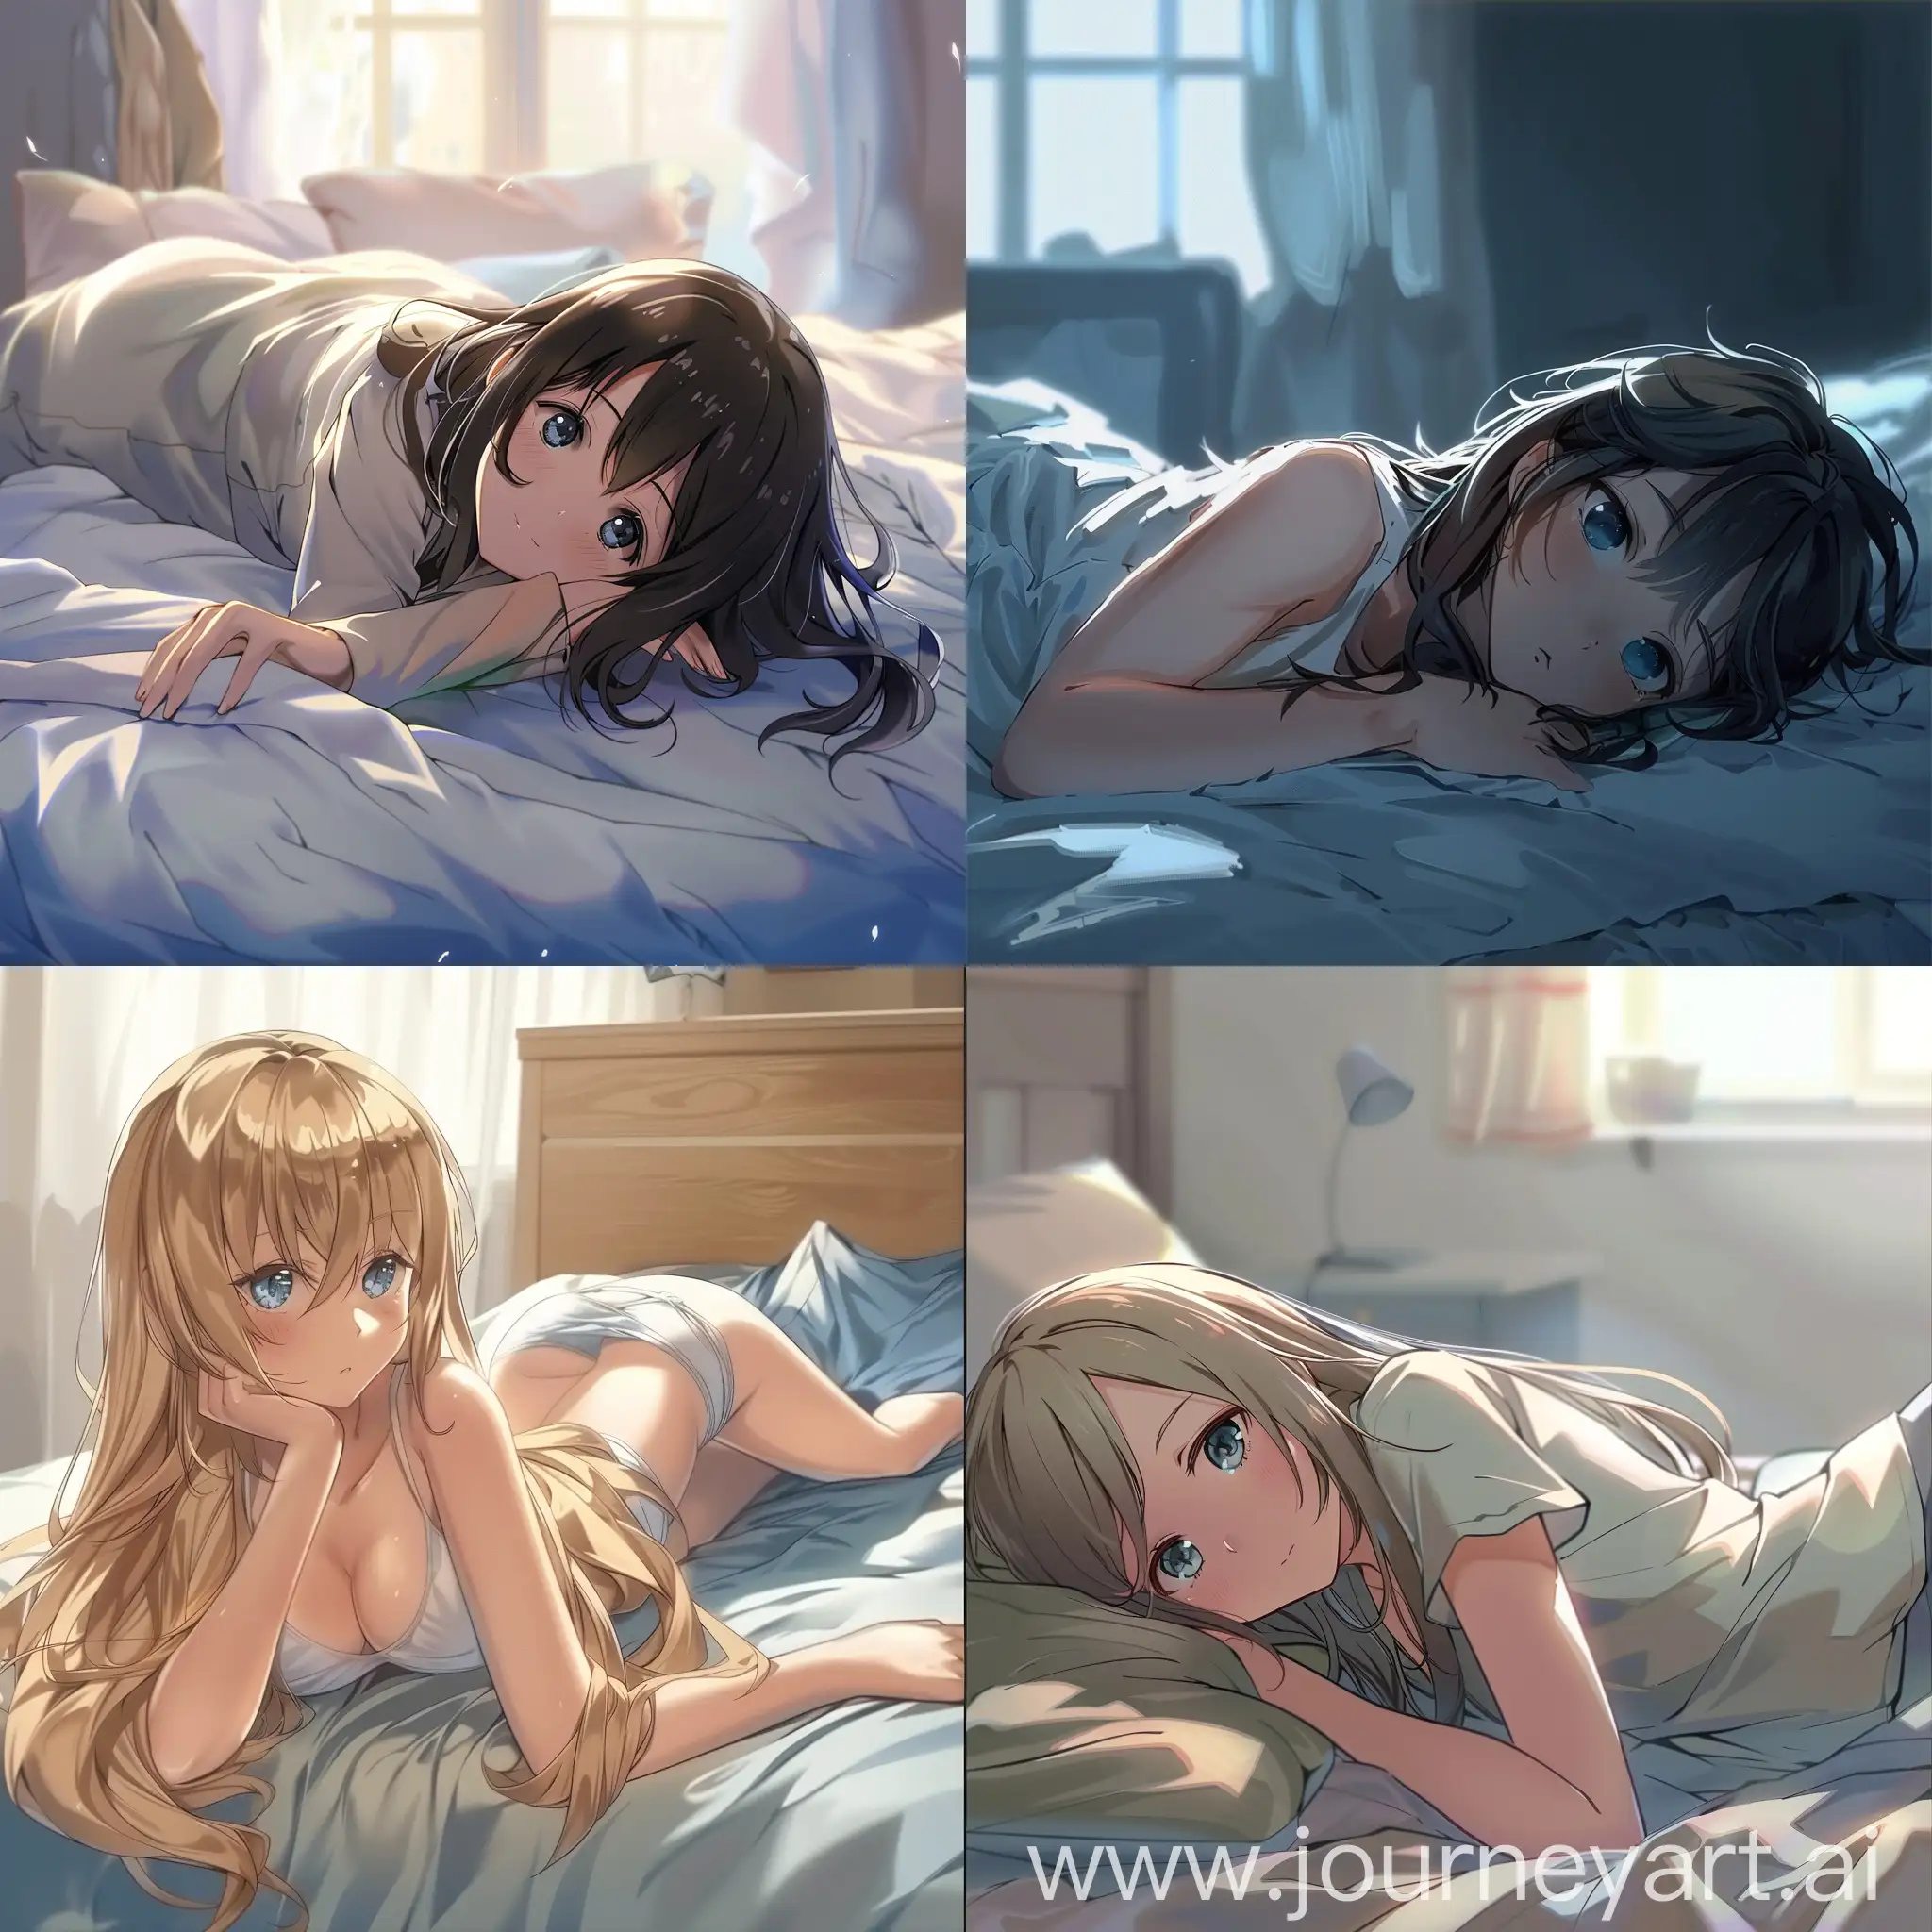 anime girl laying down on bed